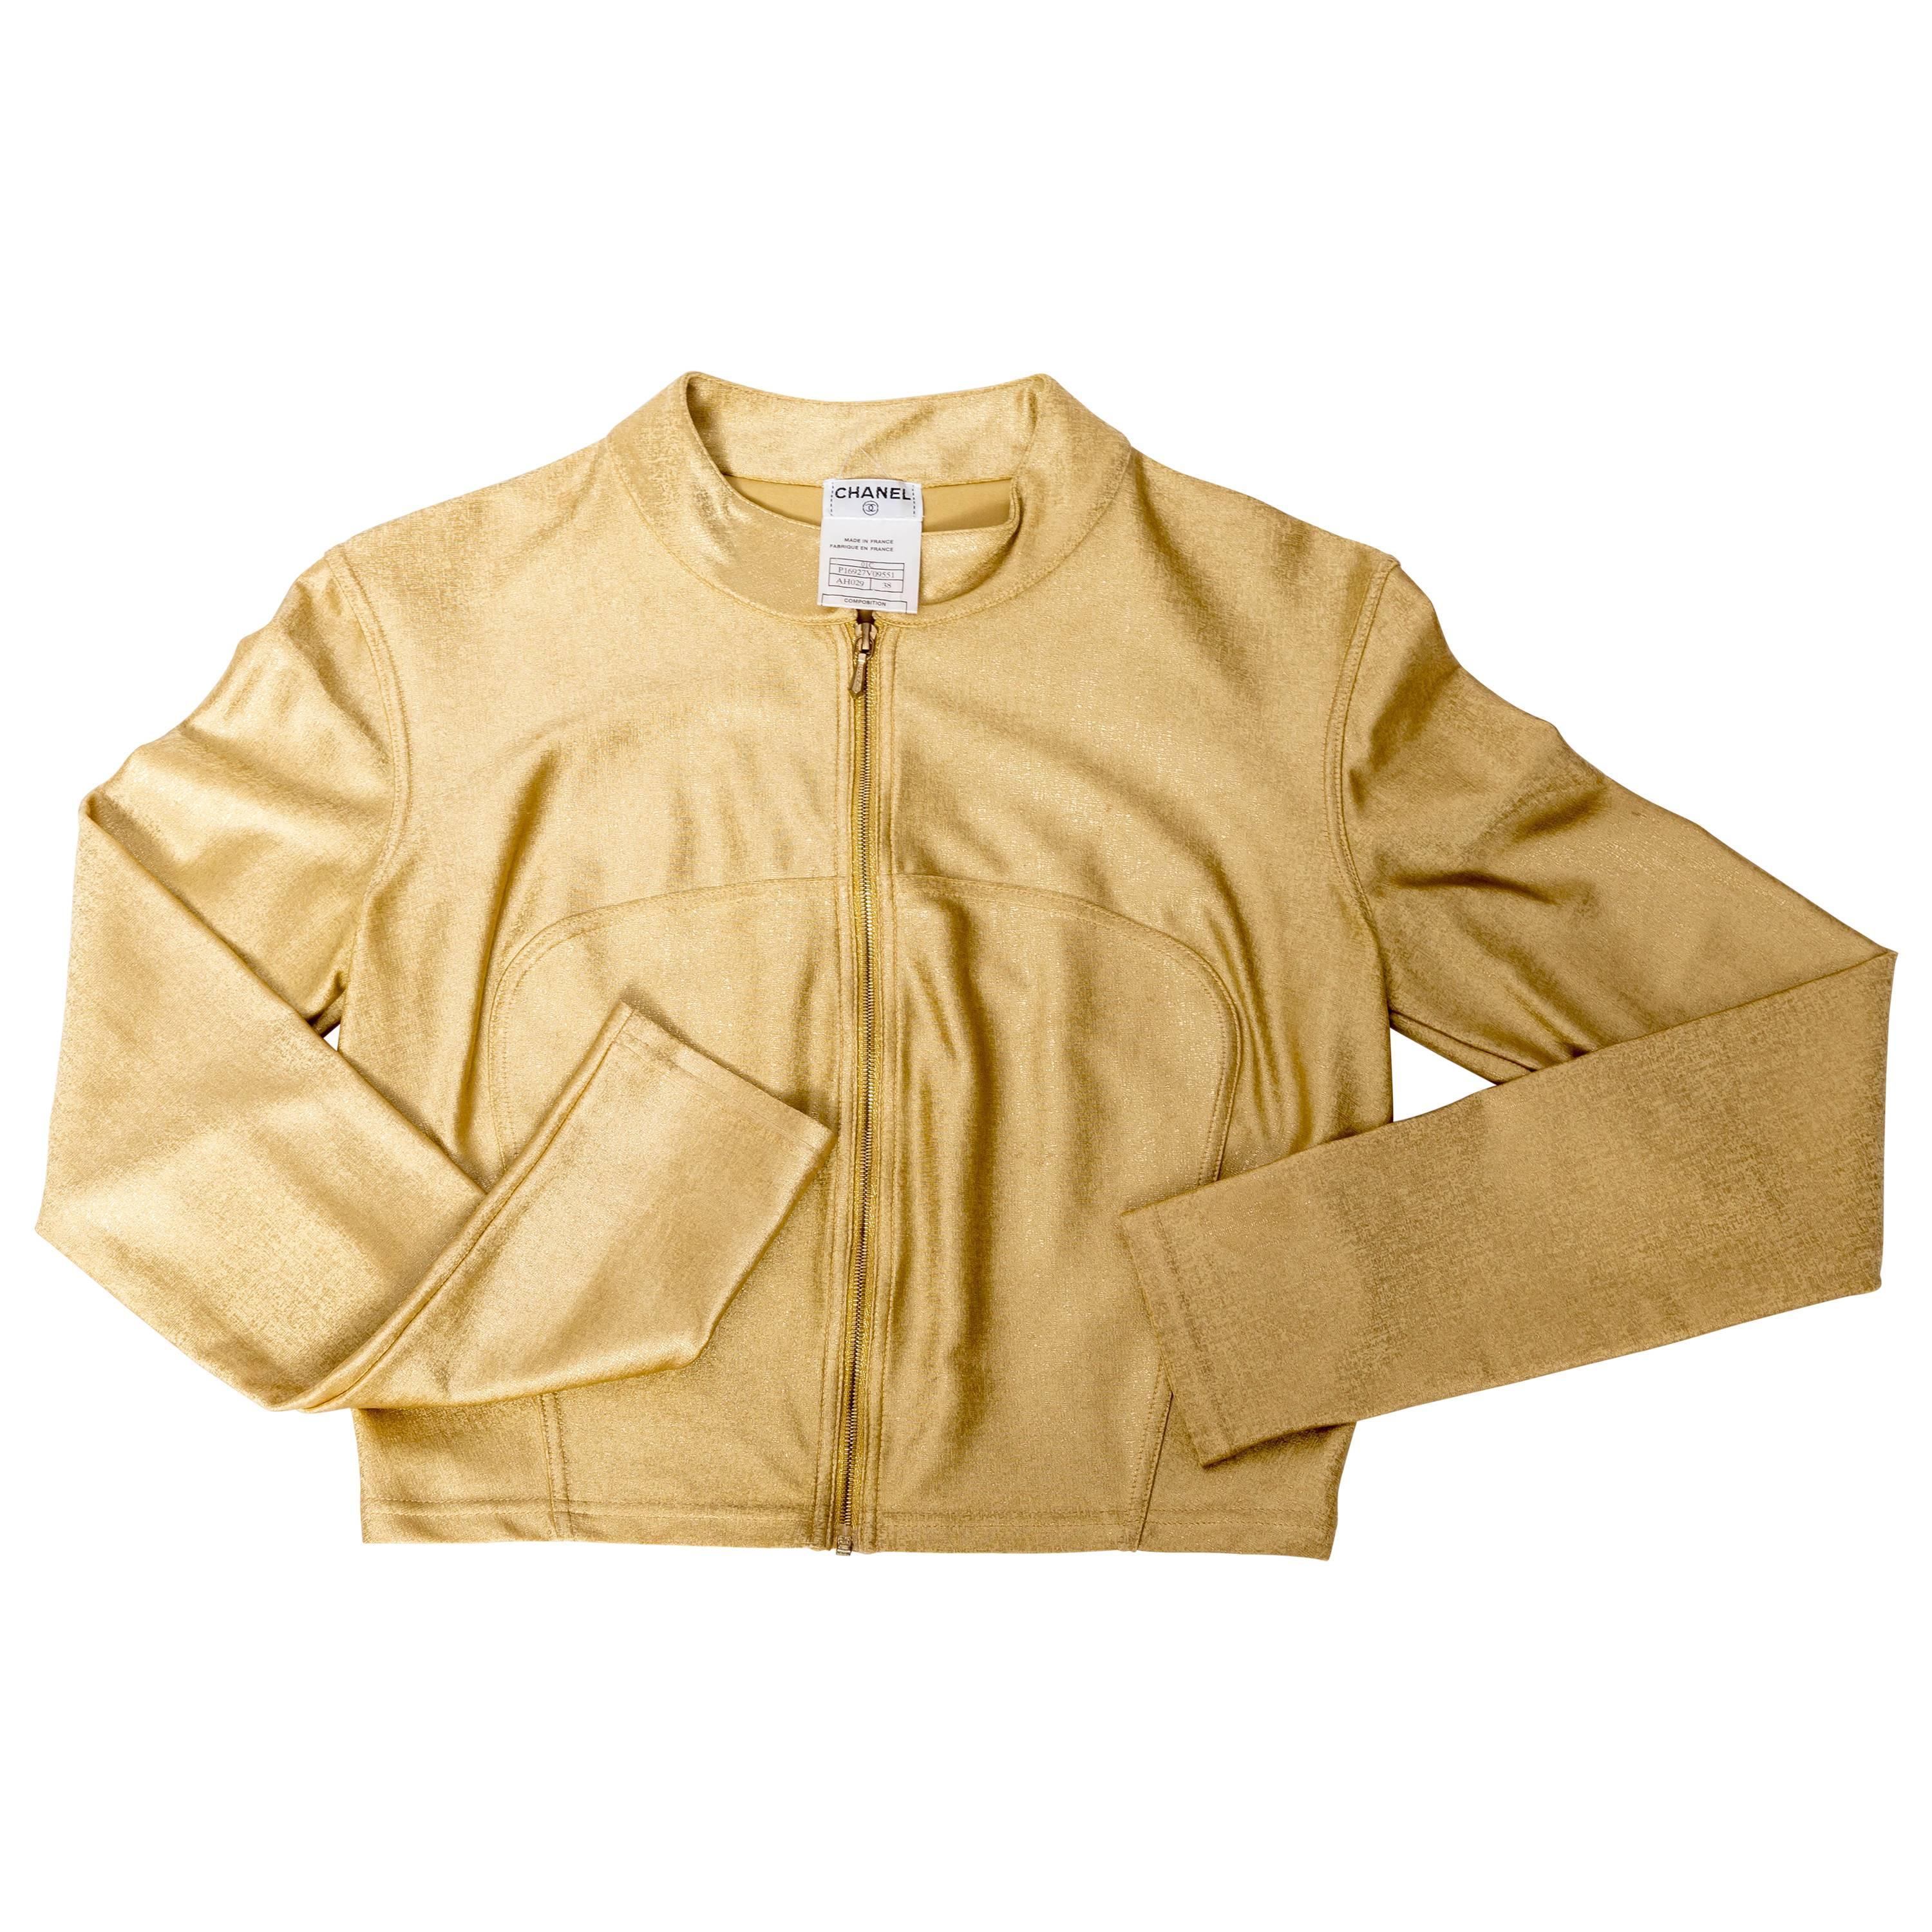 Vintage Chanel Gold Cropped Zip Top - Size 38